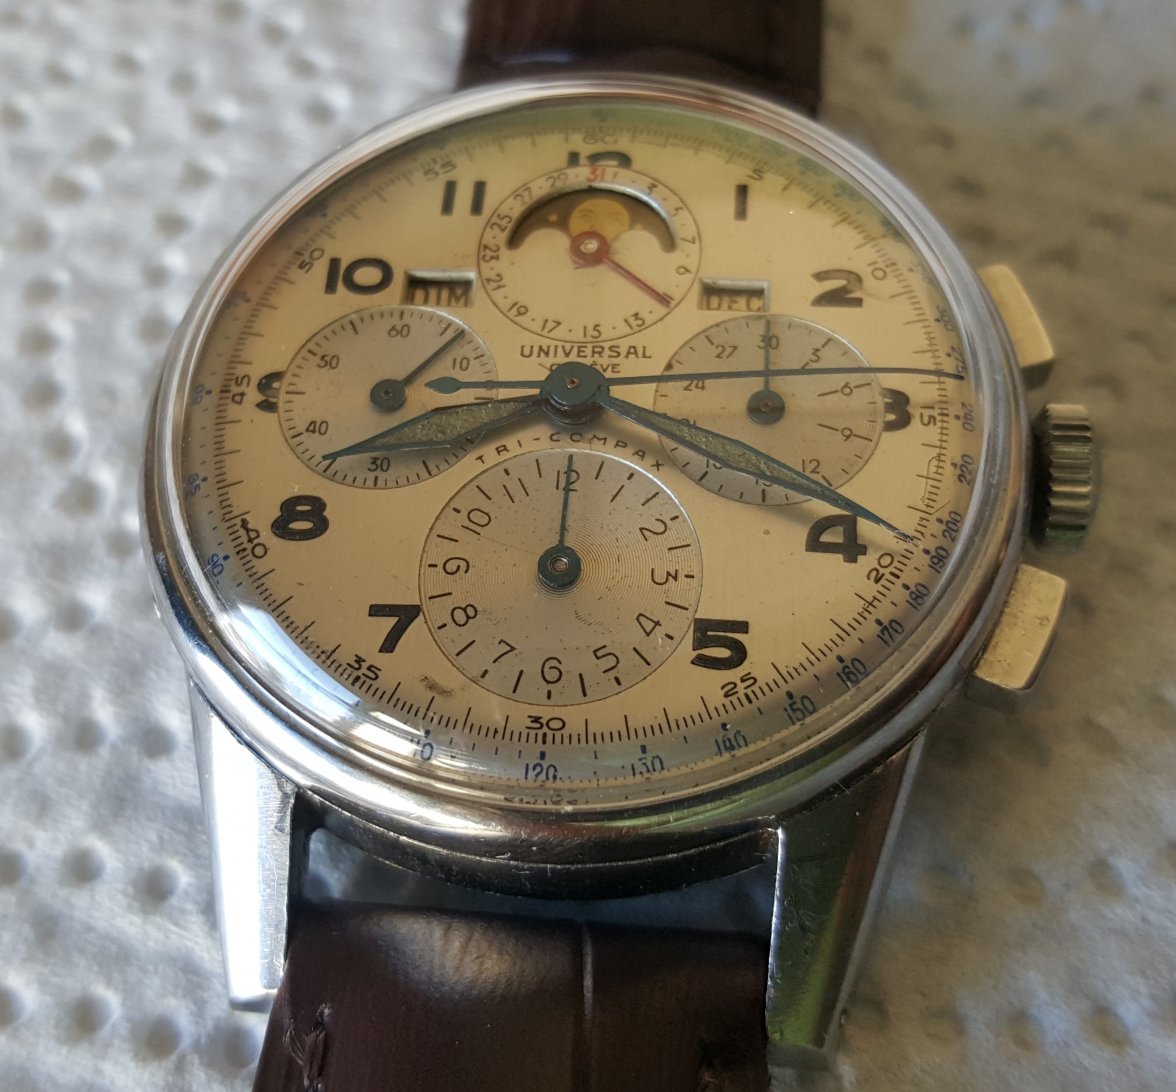 SOLD - UNIVERSAL GENEVE TRI-COMPAX 22258 - New Opportunity | Omega Forums